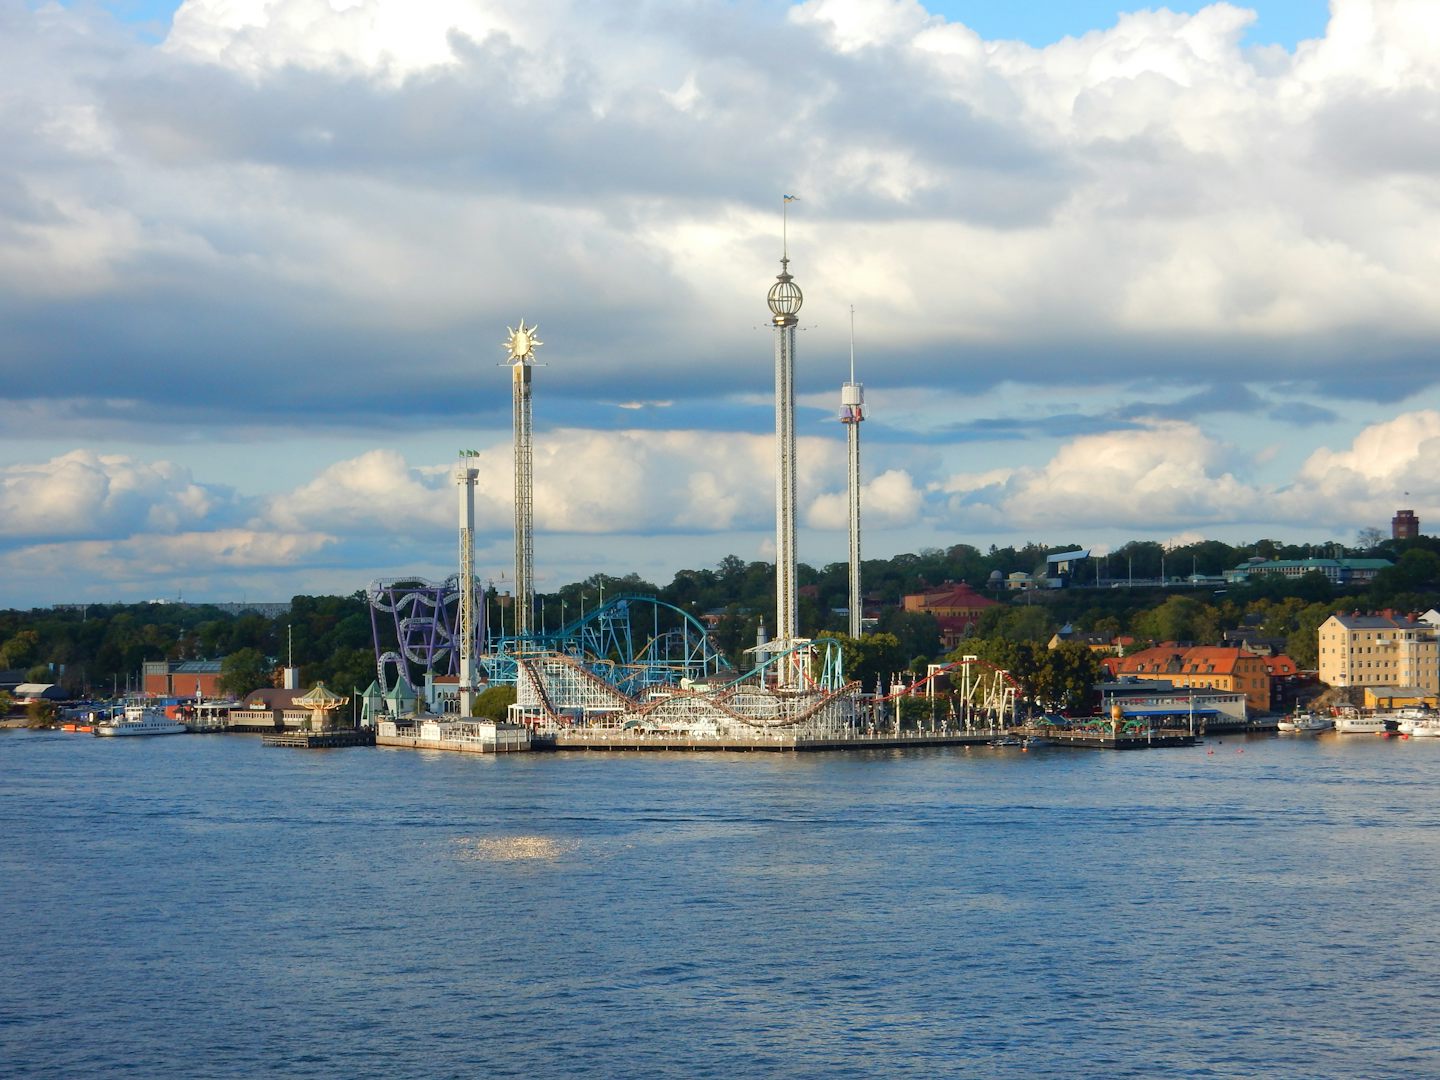 View of the amusement park in Stockholm from cabin 7002 on the port side of